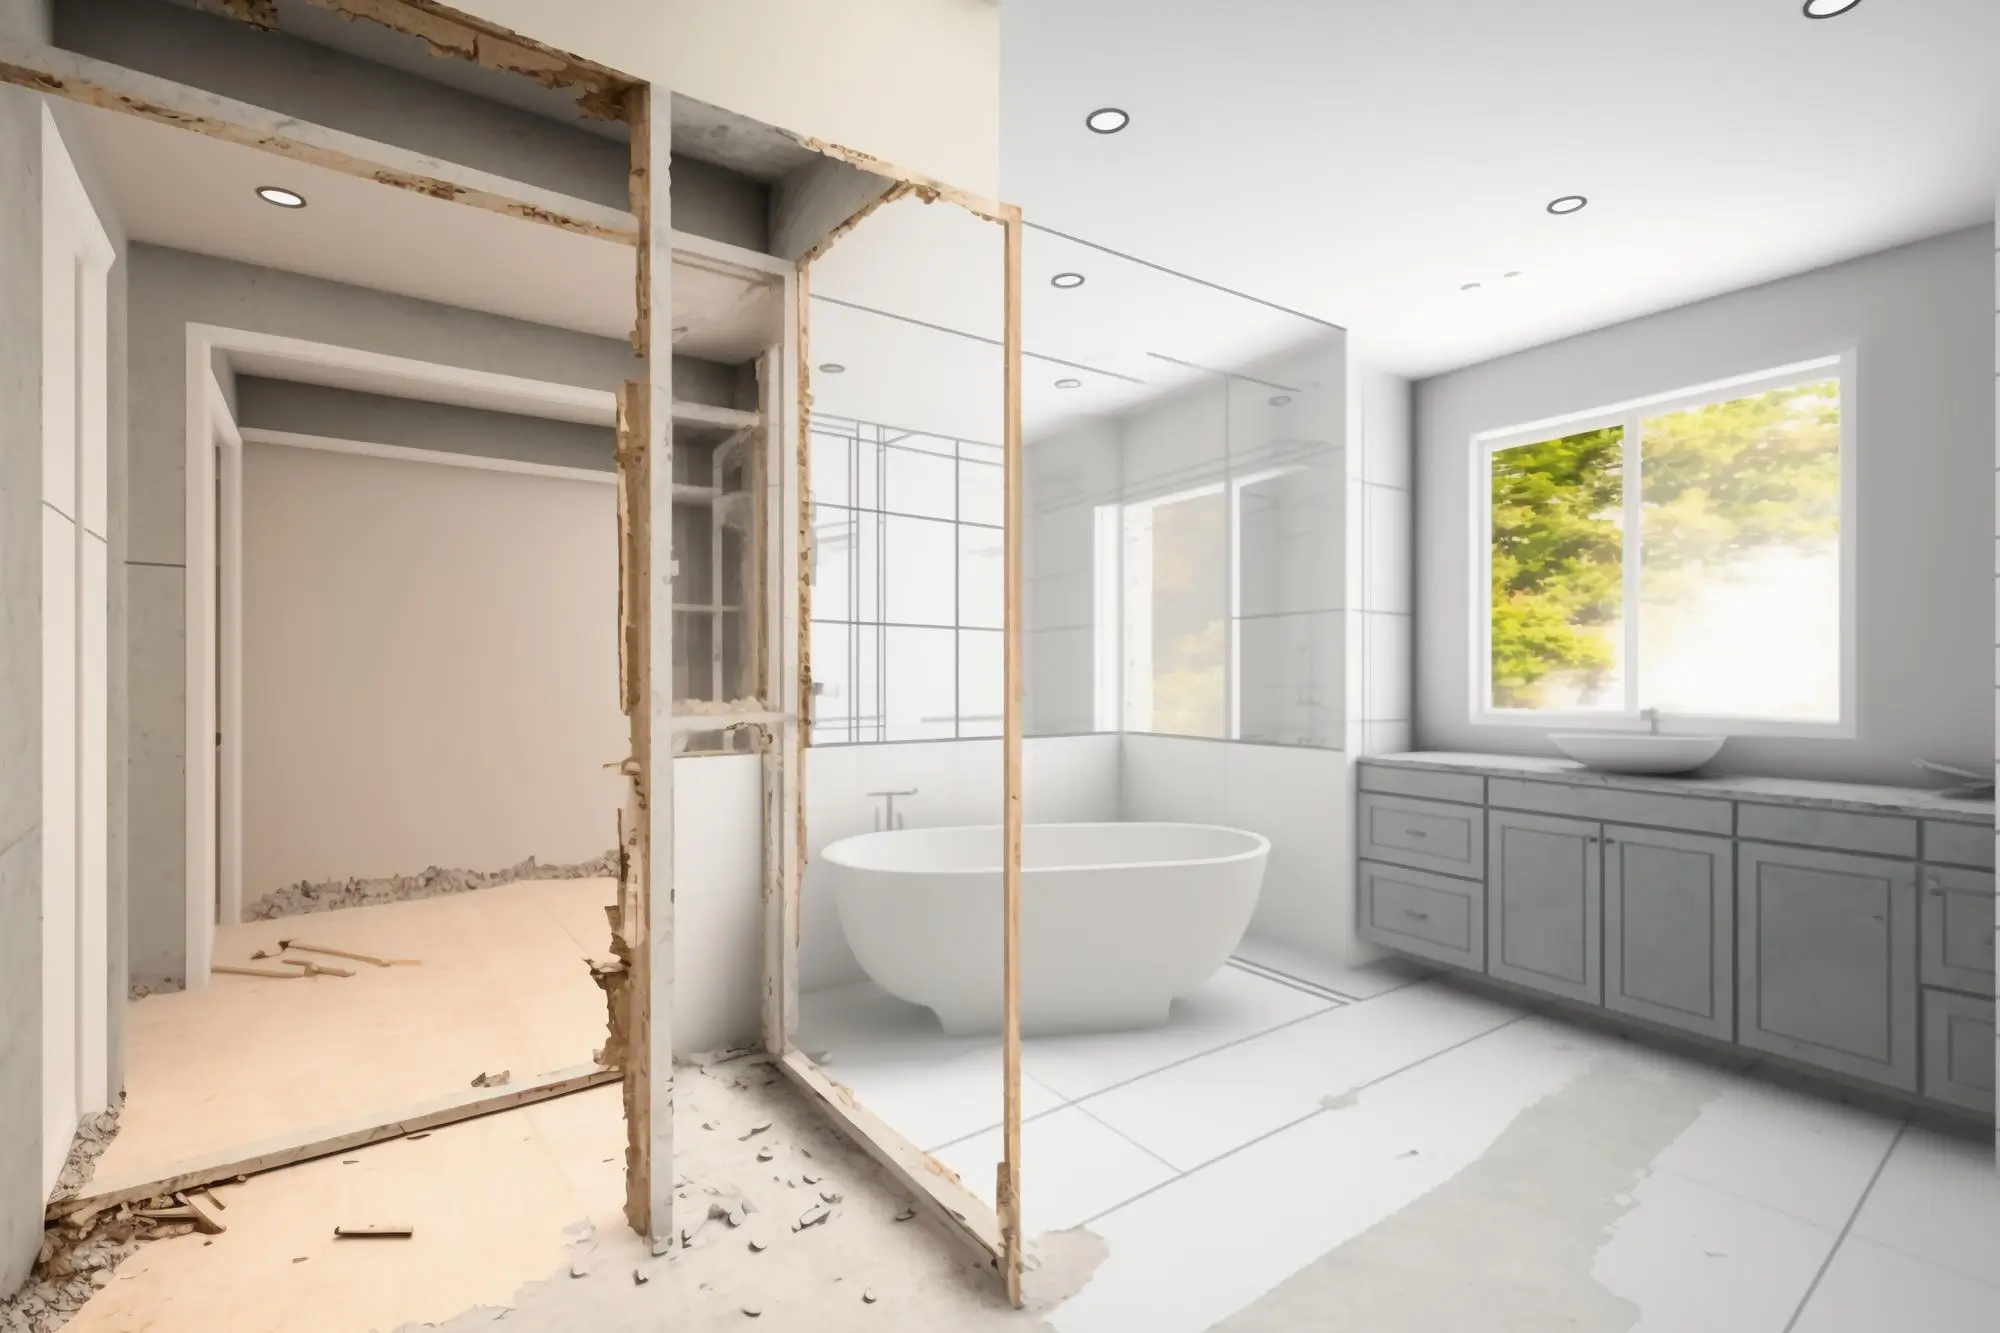 Before and after bathroom remodel process